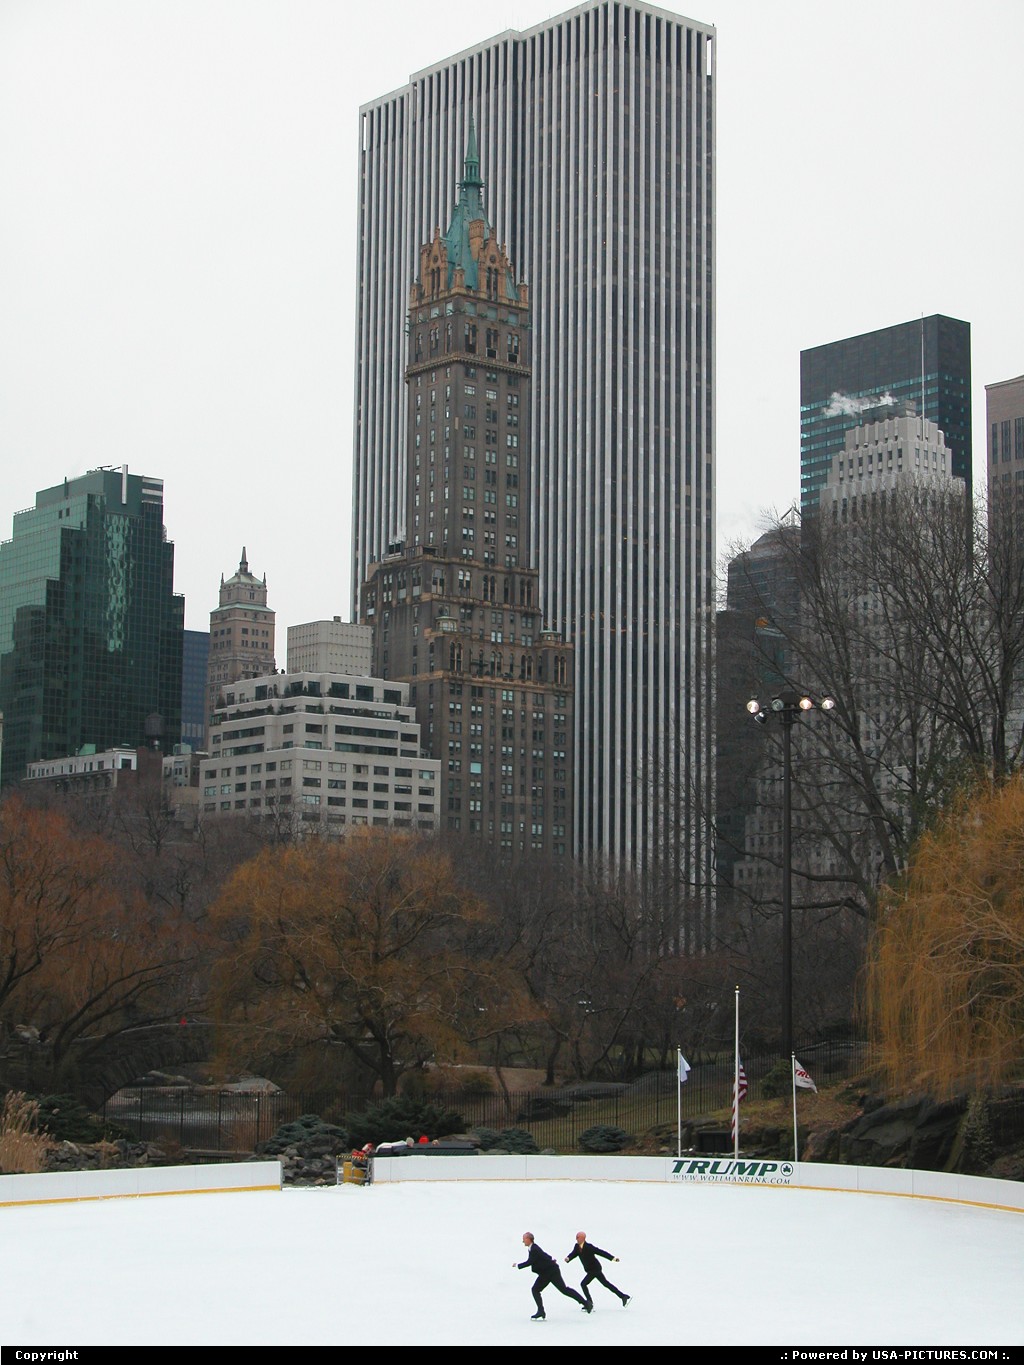 Picture by Parmeland: New York New-york   